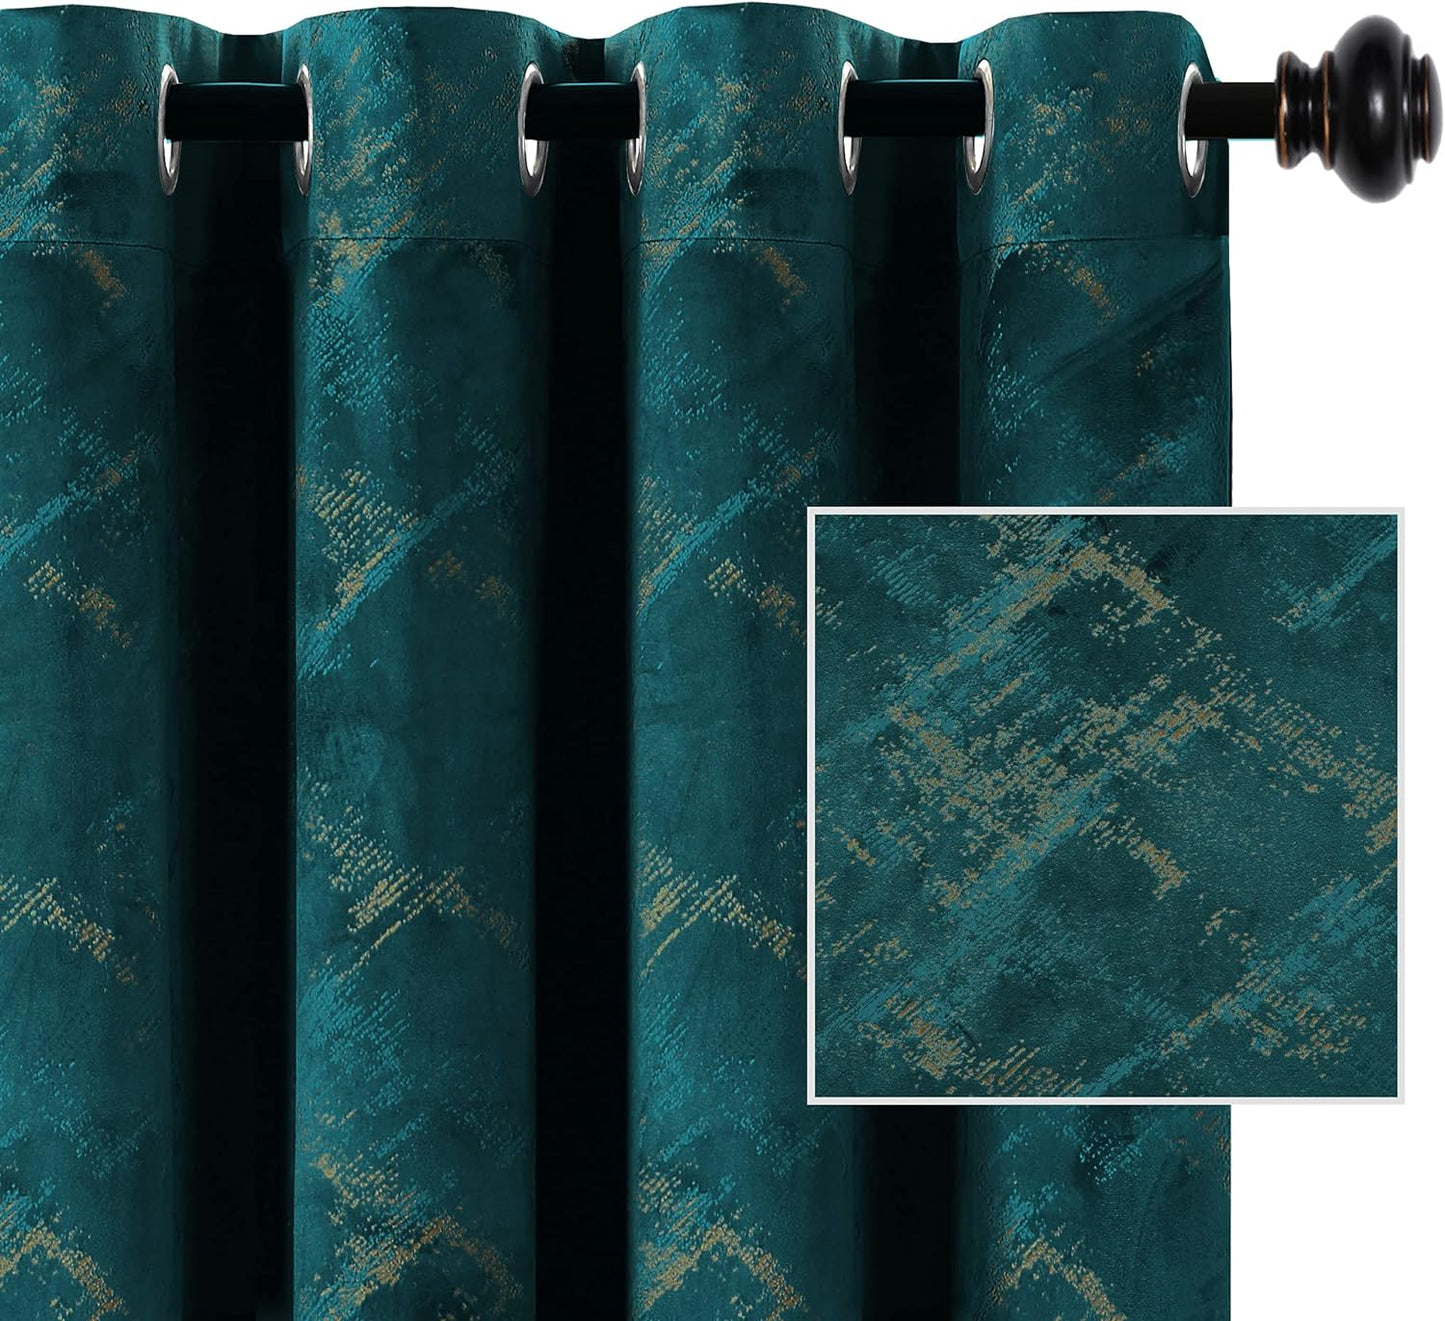 H.VERSAILTEX Luxury Velvet Curtains 84 Inches Long Thermal Insulated Blackout Curtains for Bedroom Foil Print Soft Velvet Grommet Curtain Drapes for Living Room Vintage Home Decor, 2 Panels, Ivory  H.VERSAILTEX Teal 52"W X 108"L 